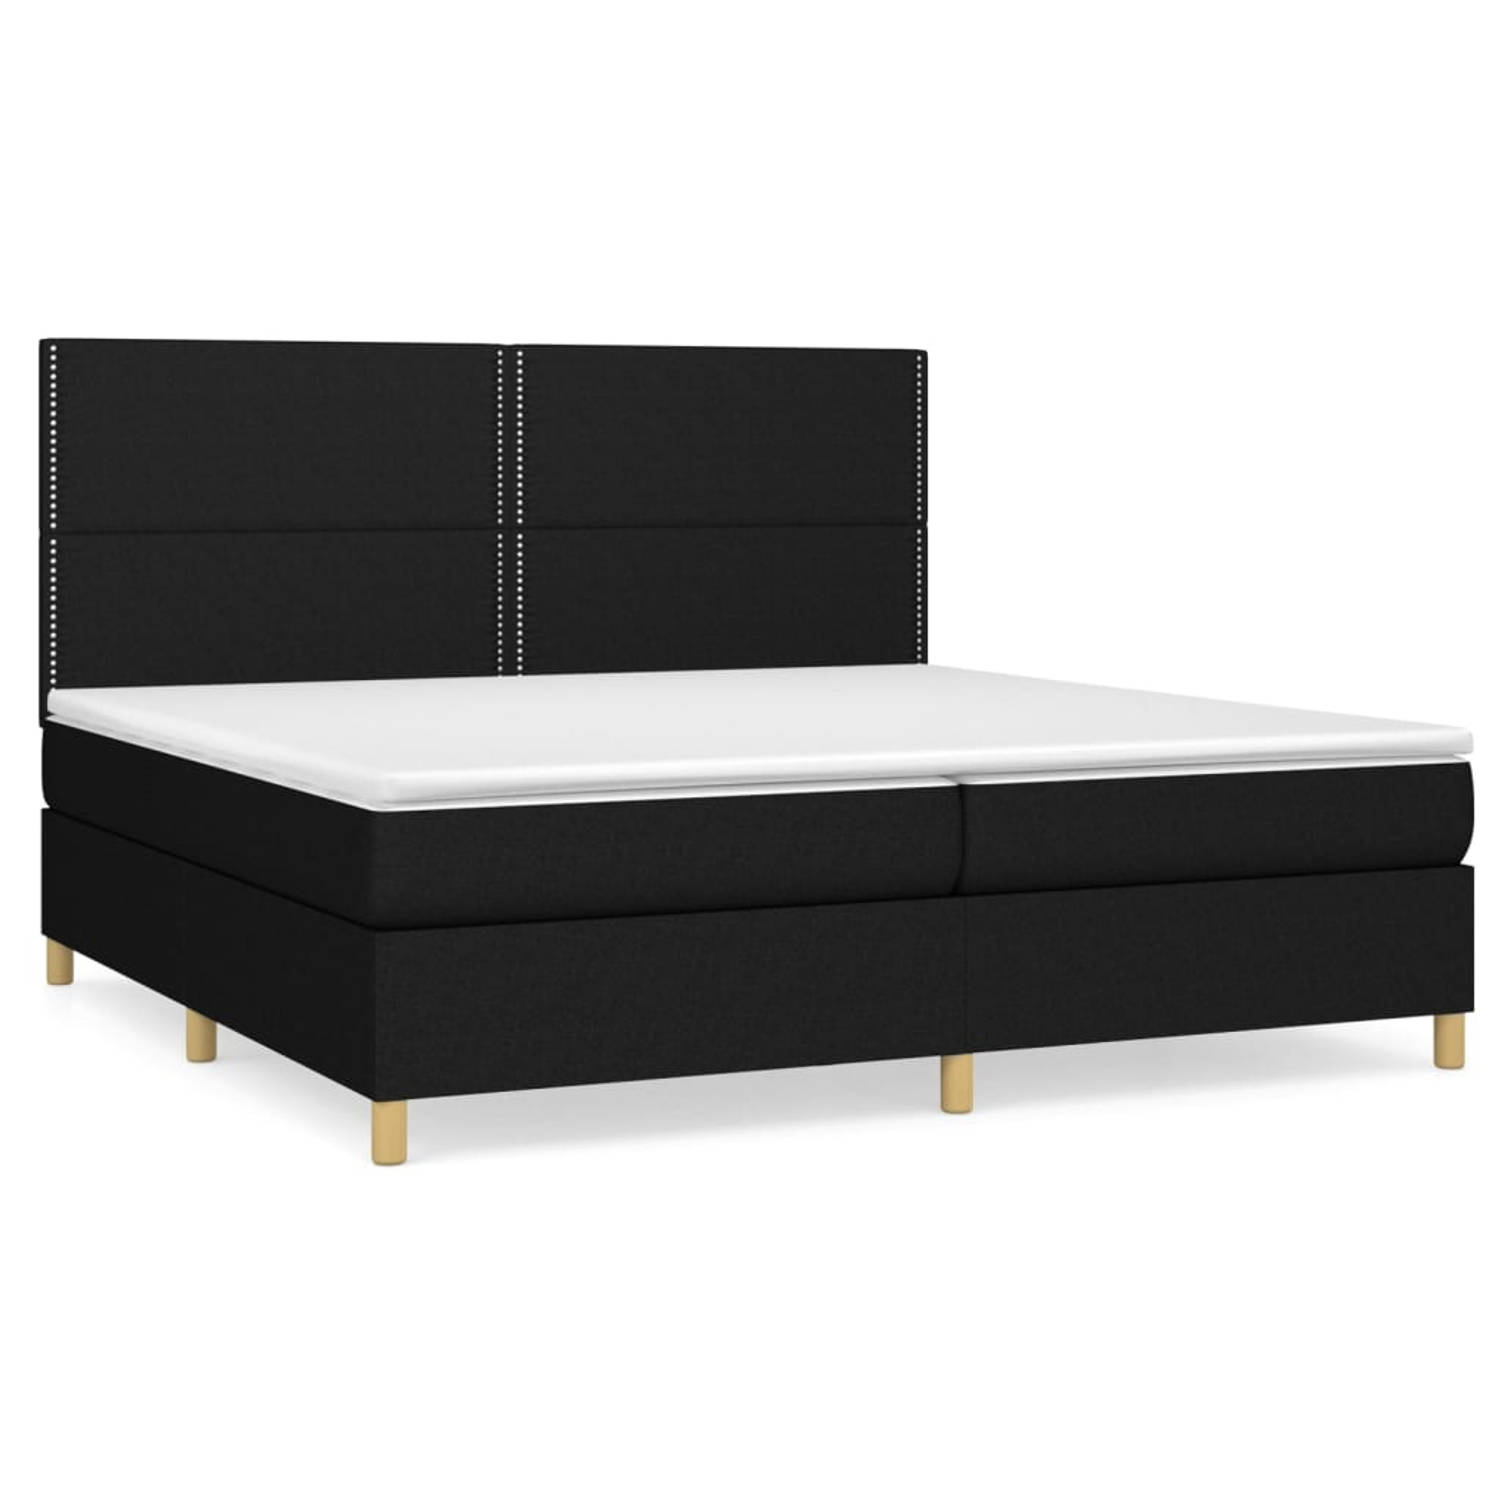 The Living Store Boxspringbed - Bed - 203 x 200 x 118/128 cm - Zwart